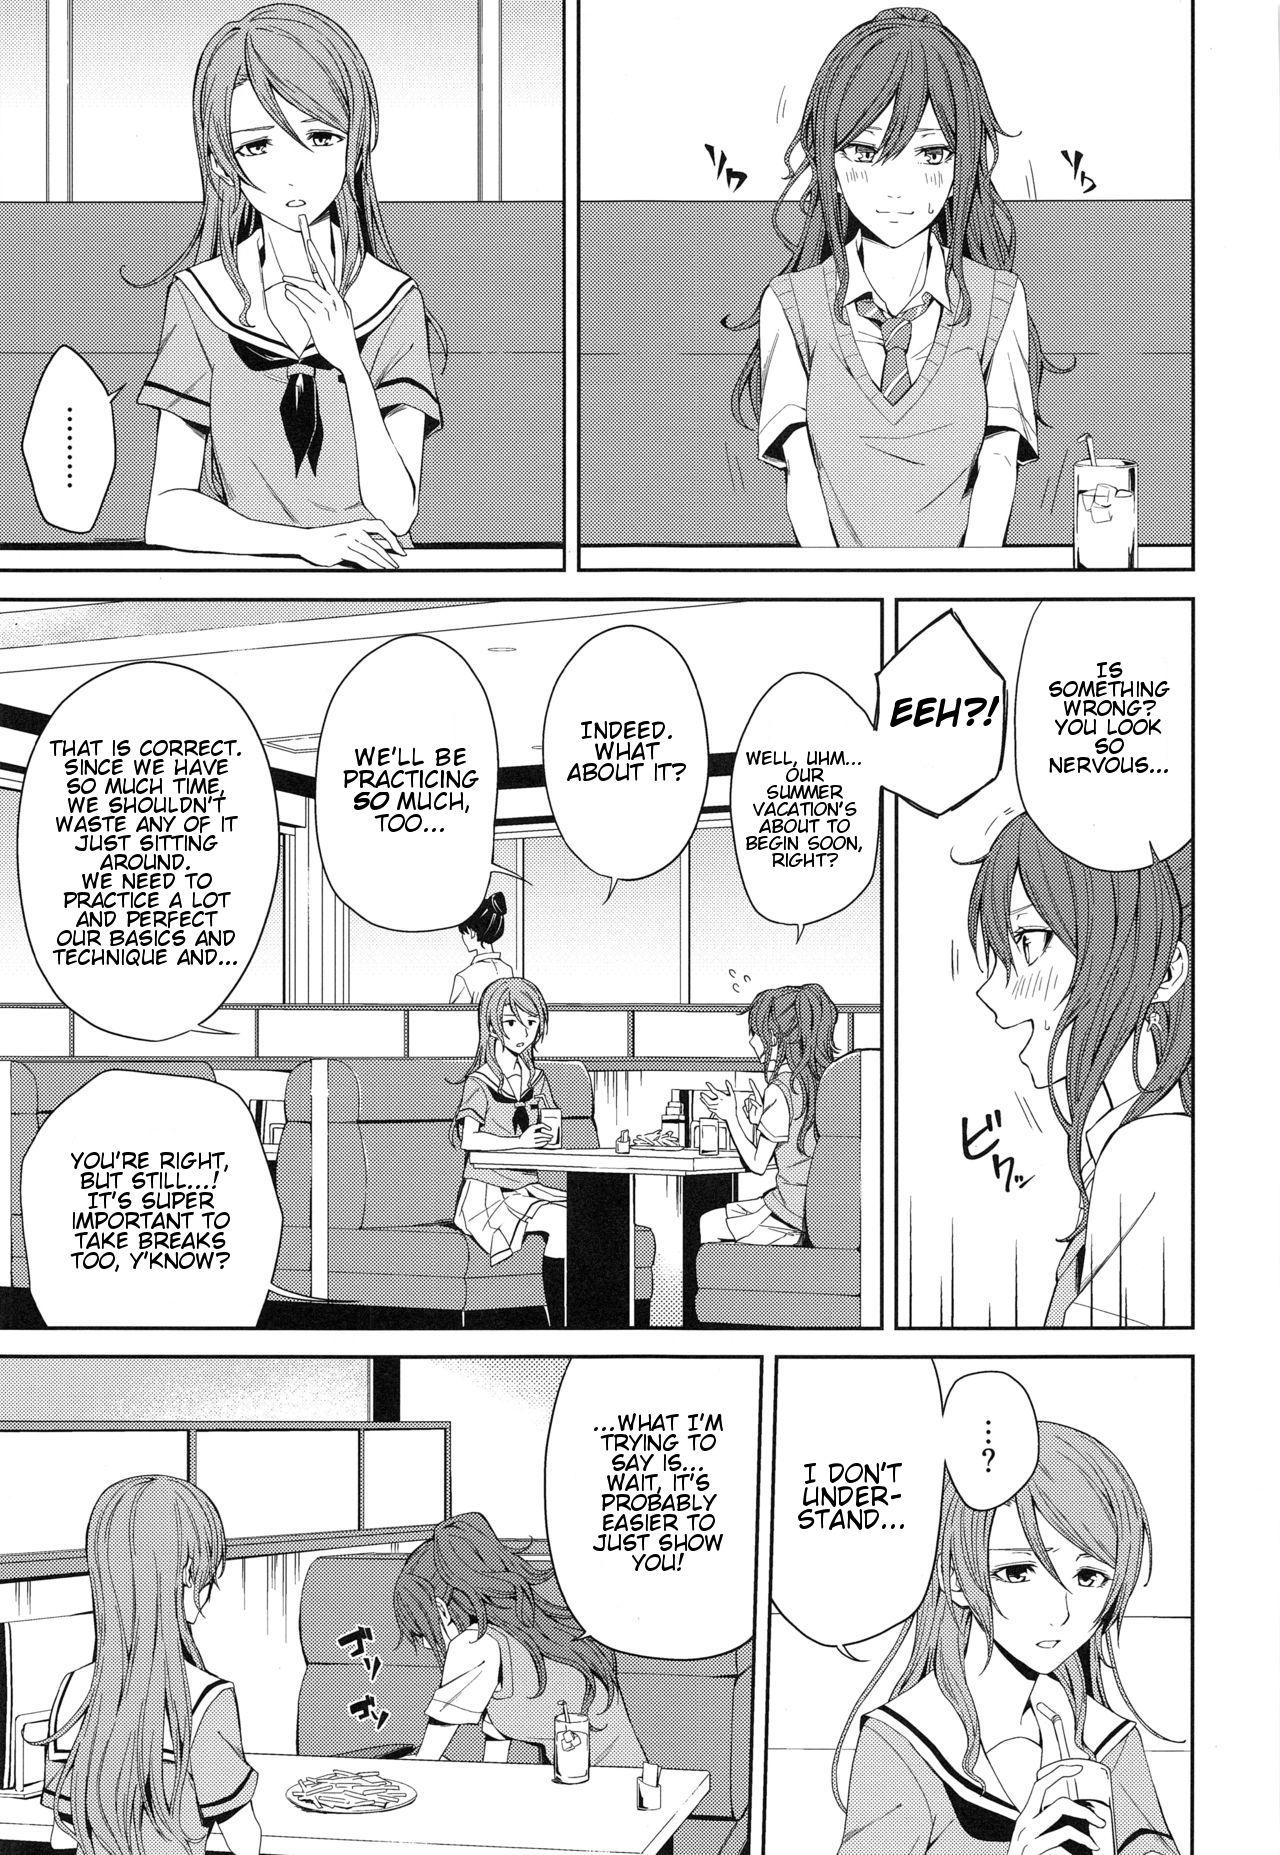 Trimmed Onsen Ryokou | Hot Spring Trip - Bang dream Russia - Page 5